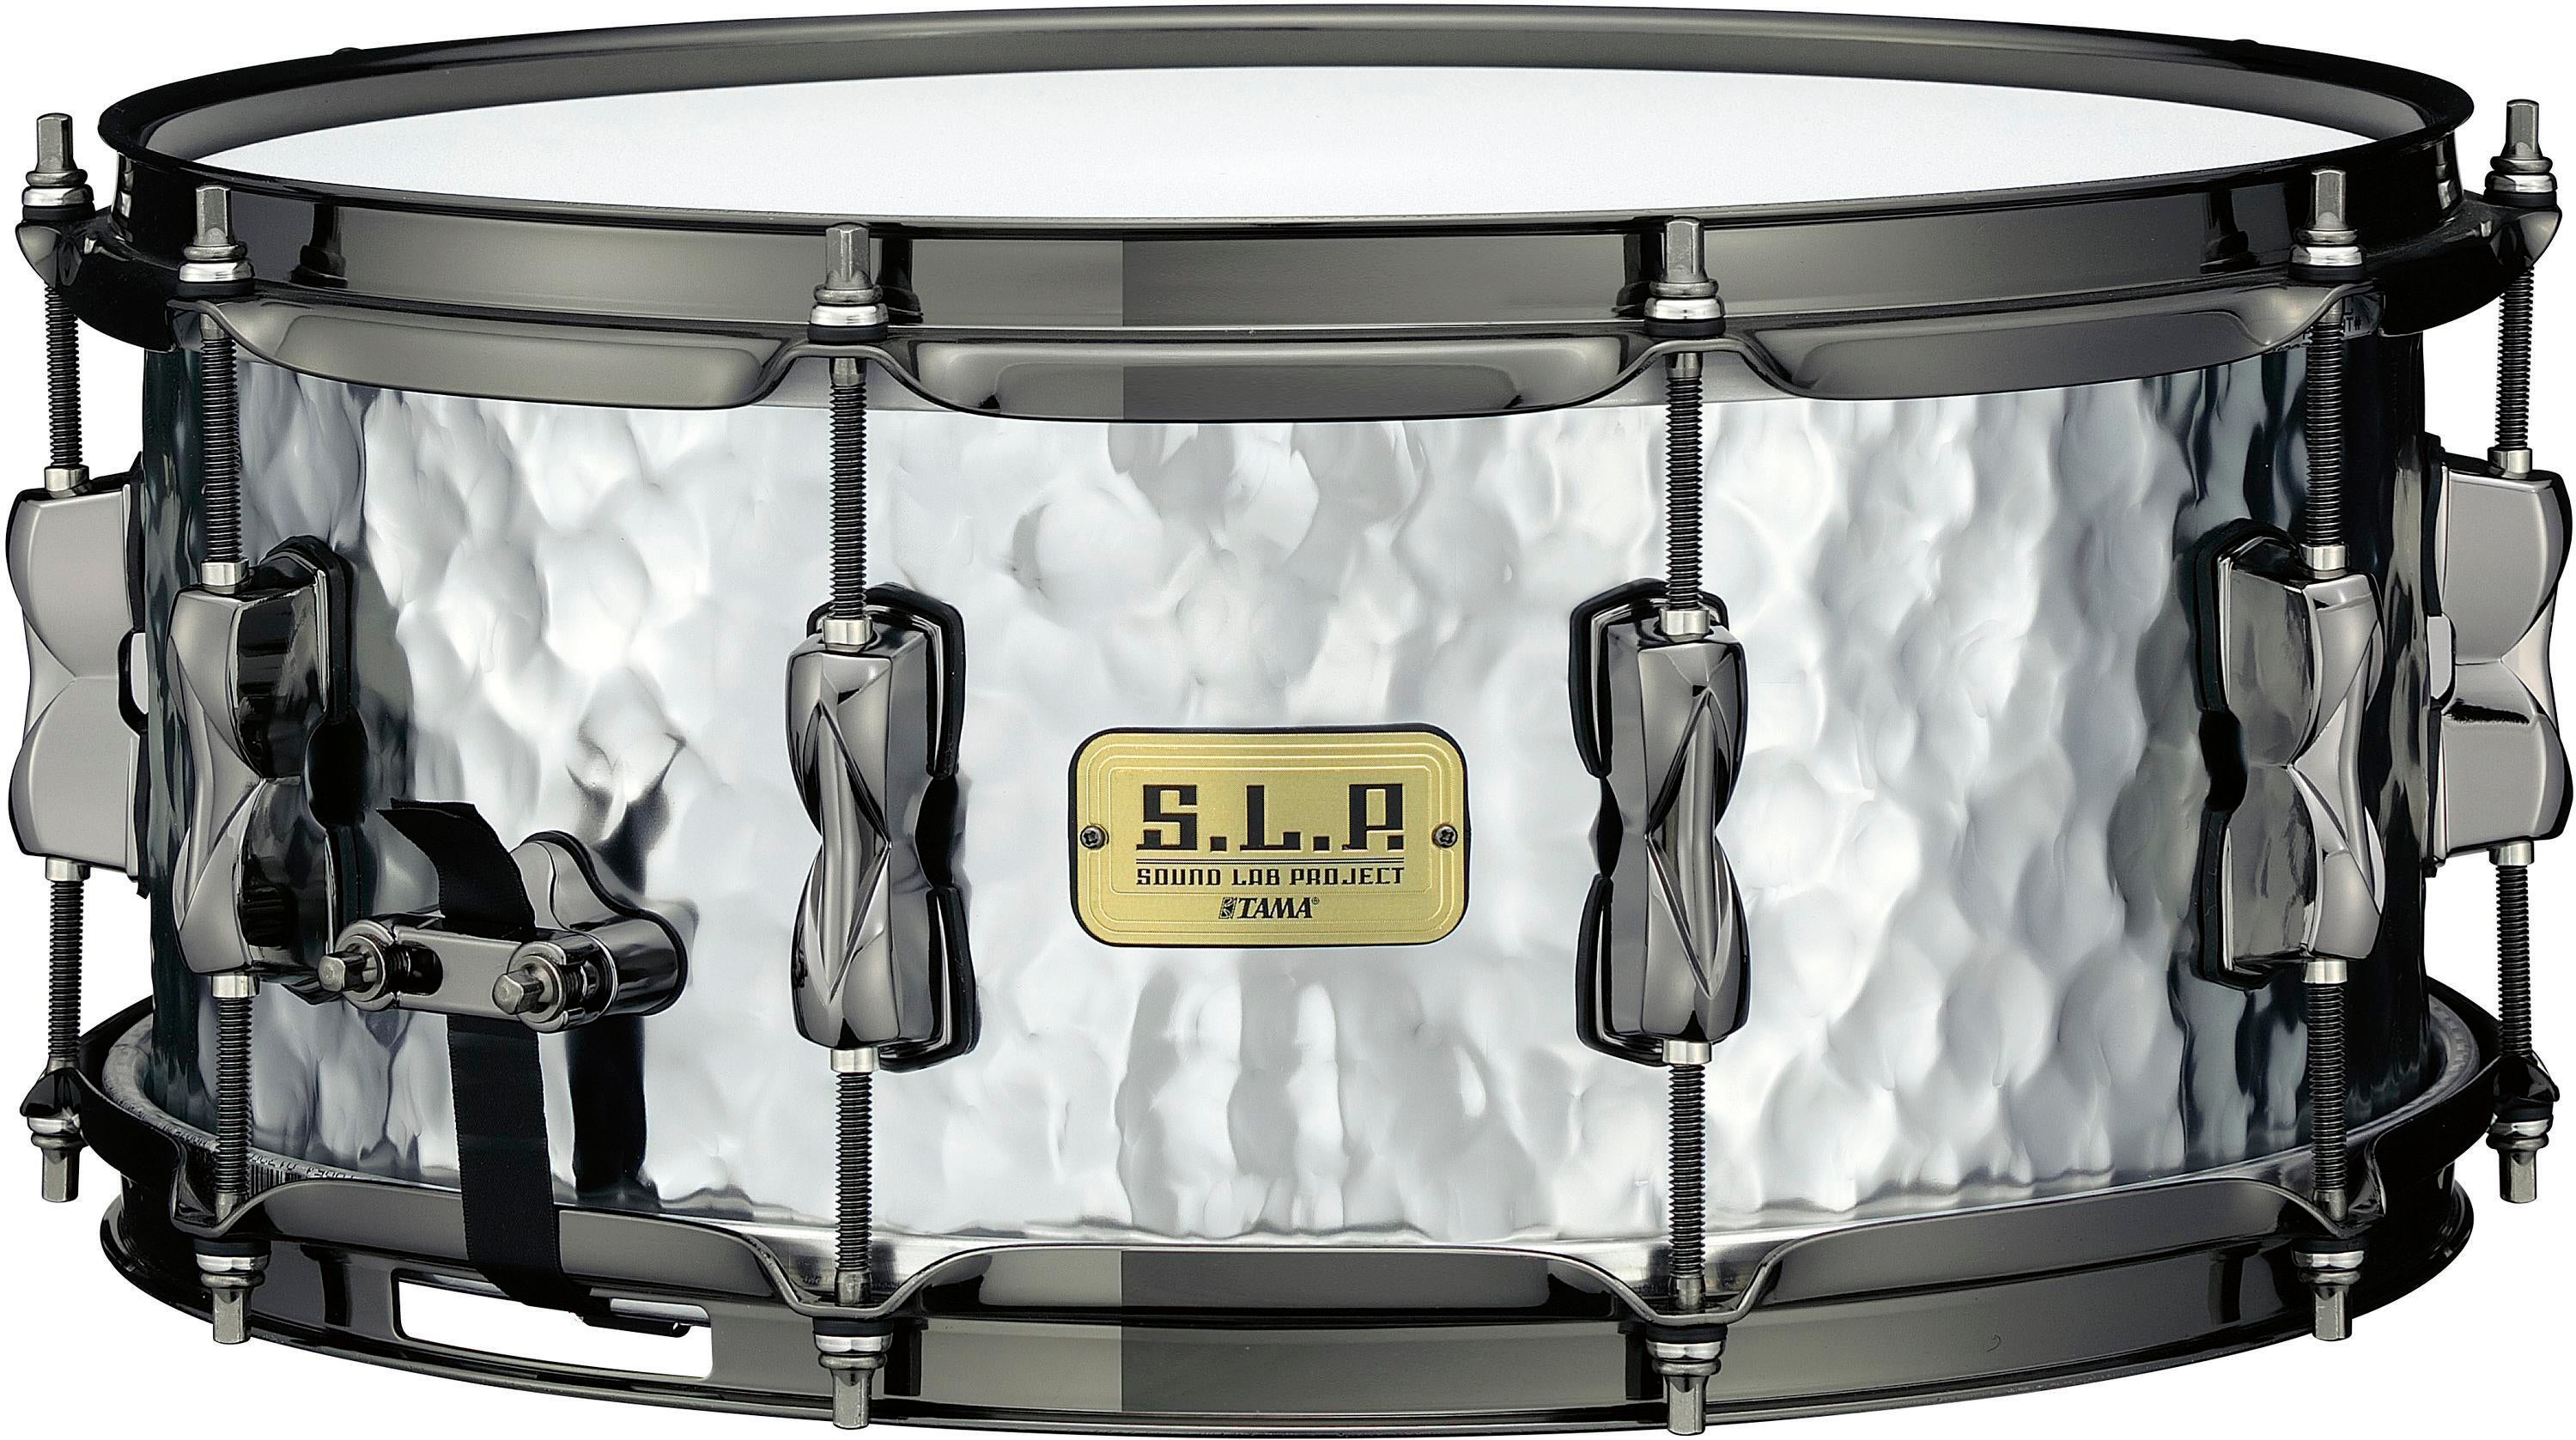 Tama S.L.P. Expressive Hammered Steel Snare Drum - 6 x 14 inch 